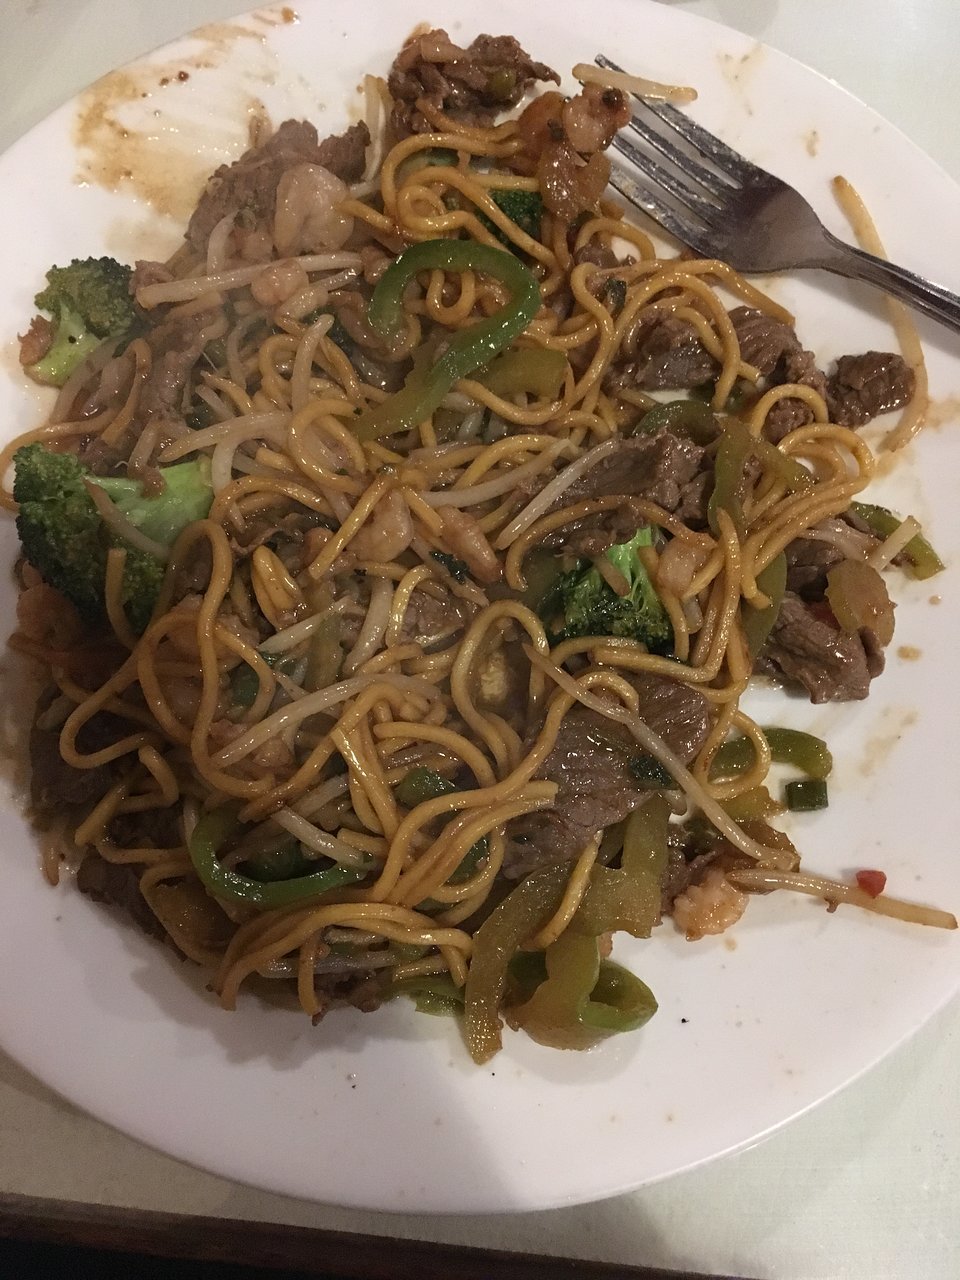 Riverview Mongolian Grill